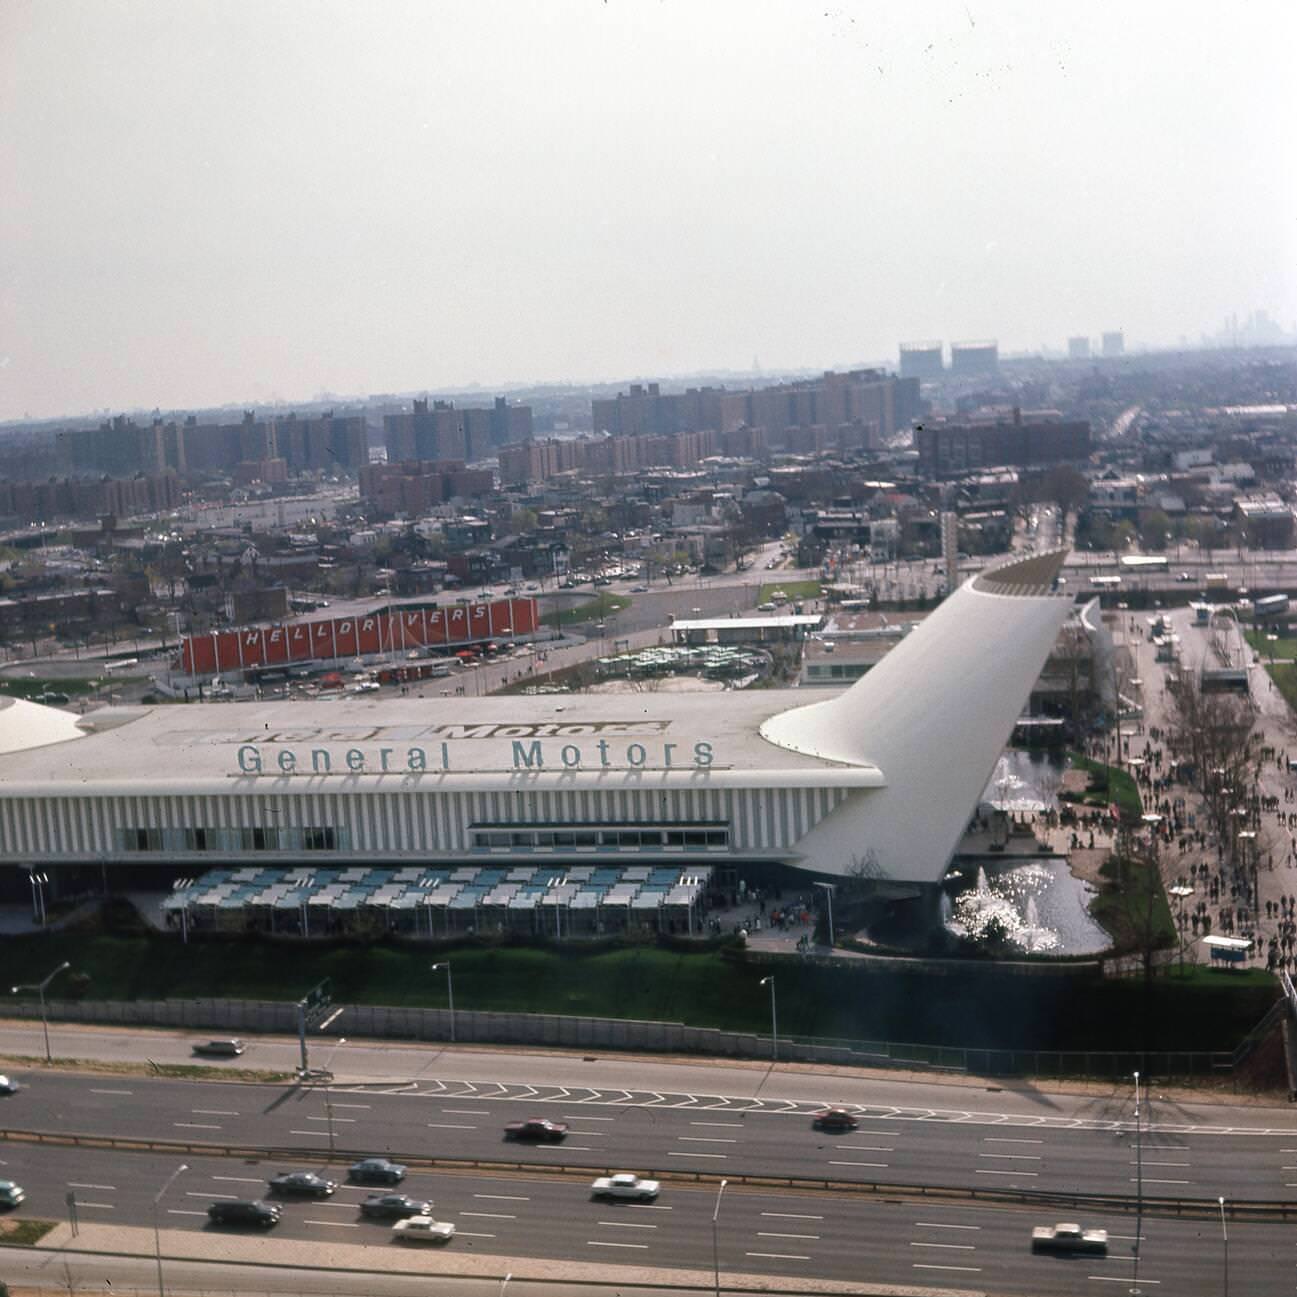 A Panoramic Aerial View From The New York State Pavilion At The New York World'S Fair, Flushing Meadows-Corona, Queens, 1964.